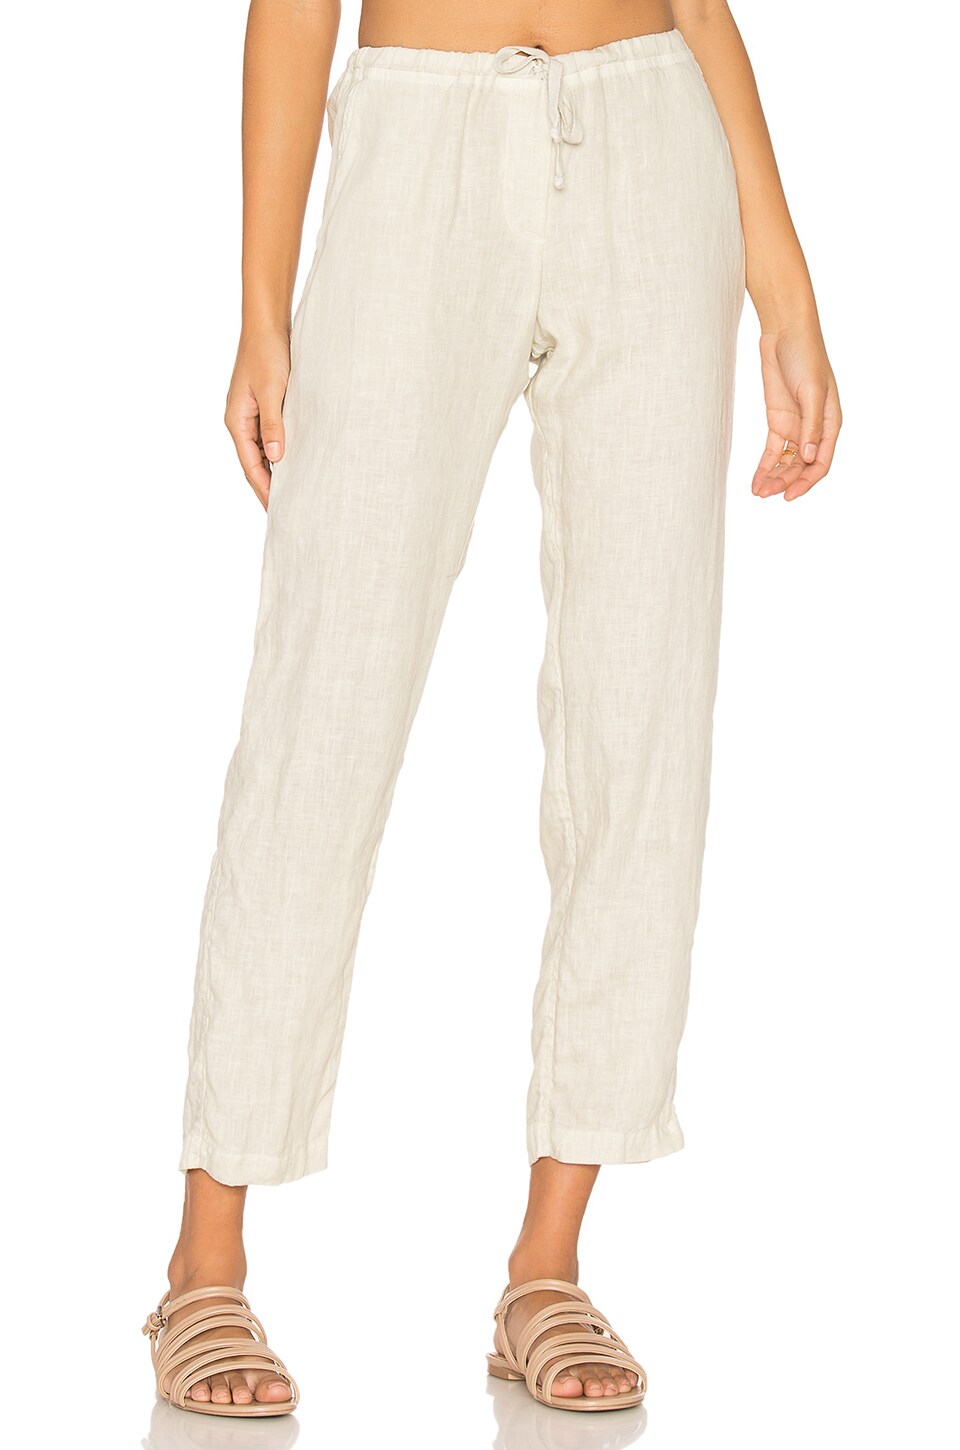 CP SHADES Hampton Tapered Pant in Dune | REVOLVE